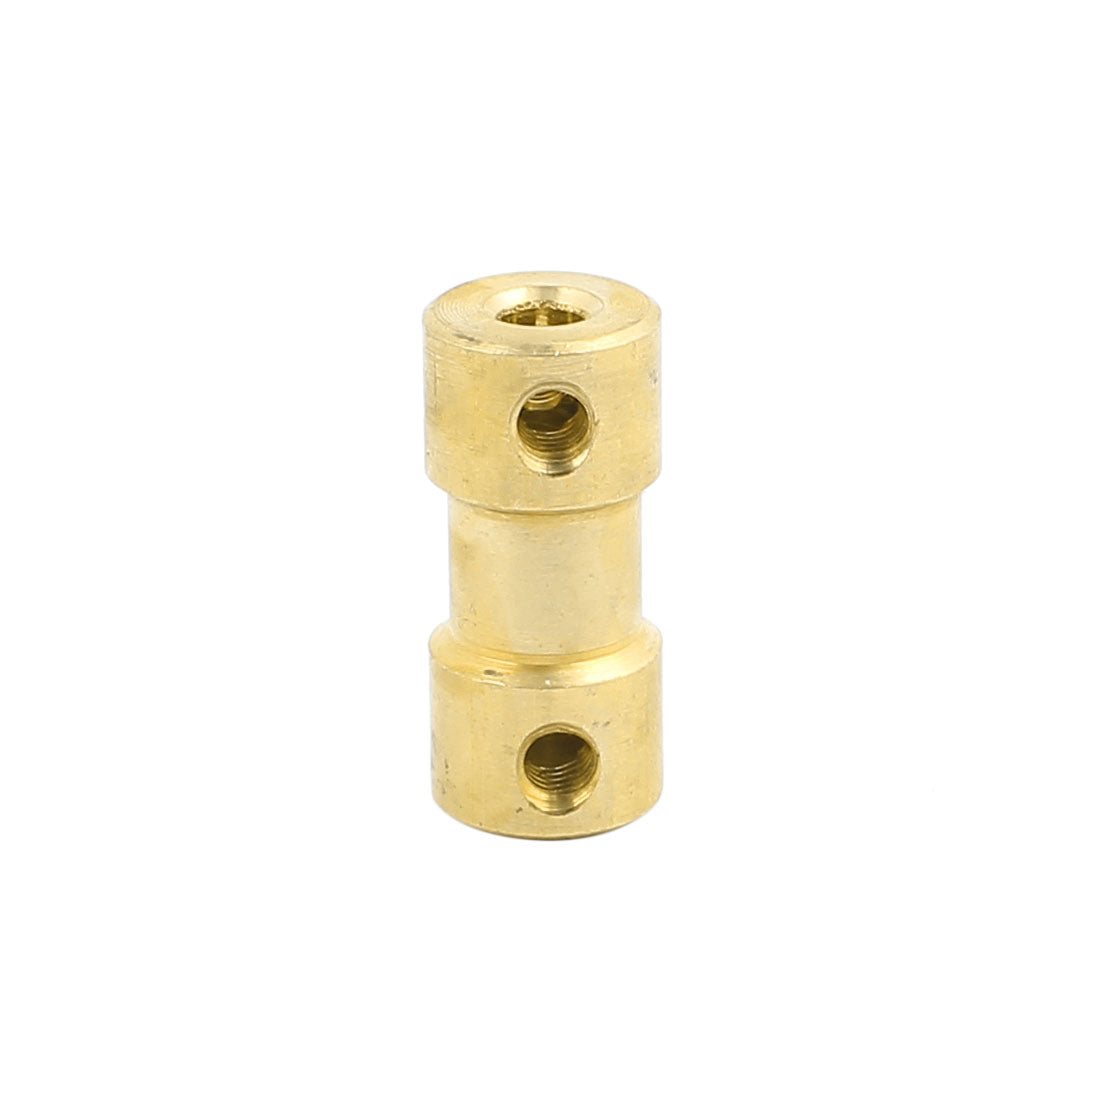 Uxcell Uxcell 2.3mmx2.3mm Brass Shaft Coupling Coupler Motor Transmission Motor Connector for RC Boat Model